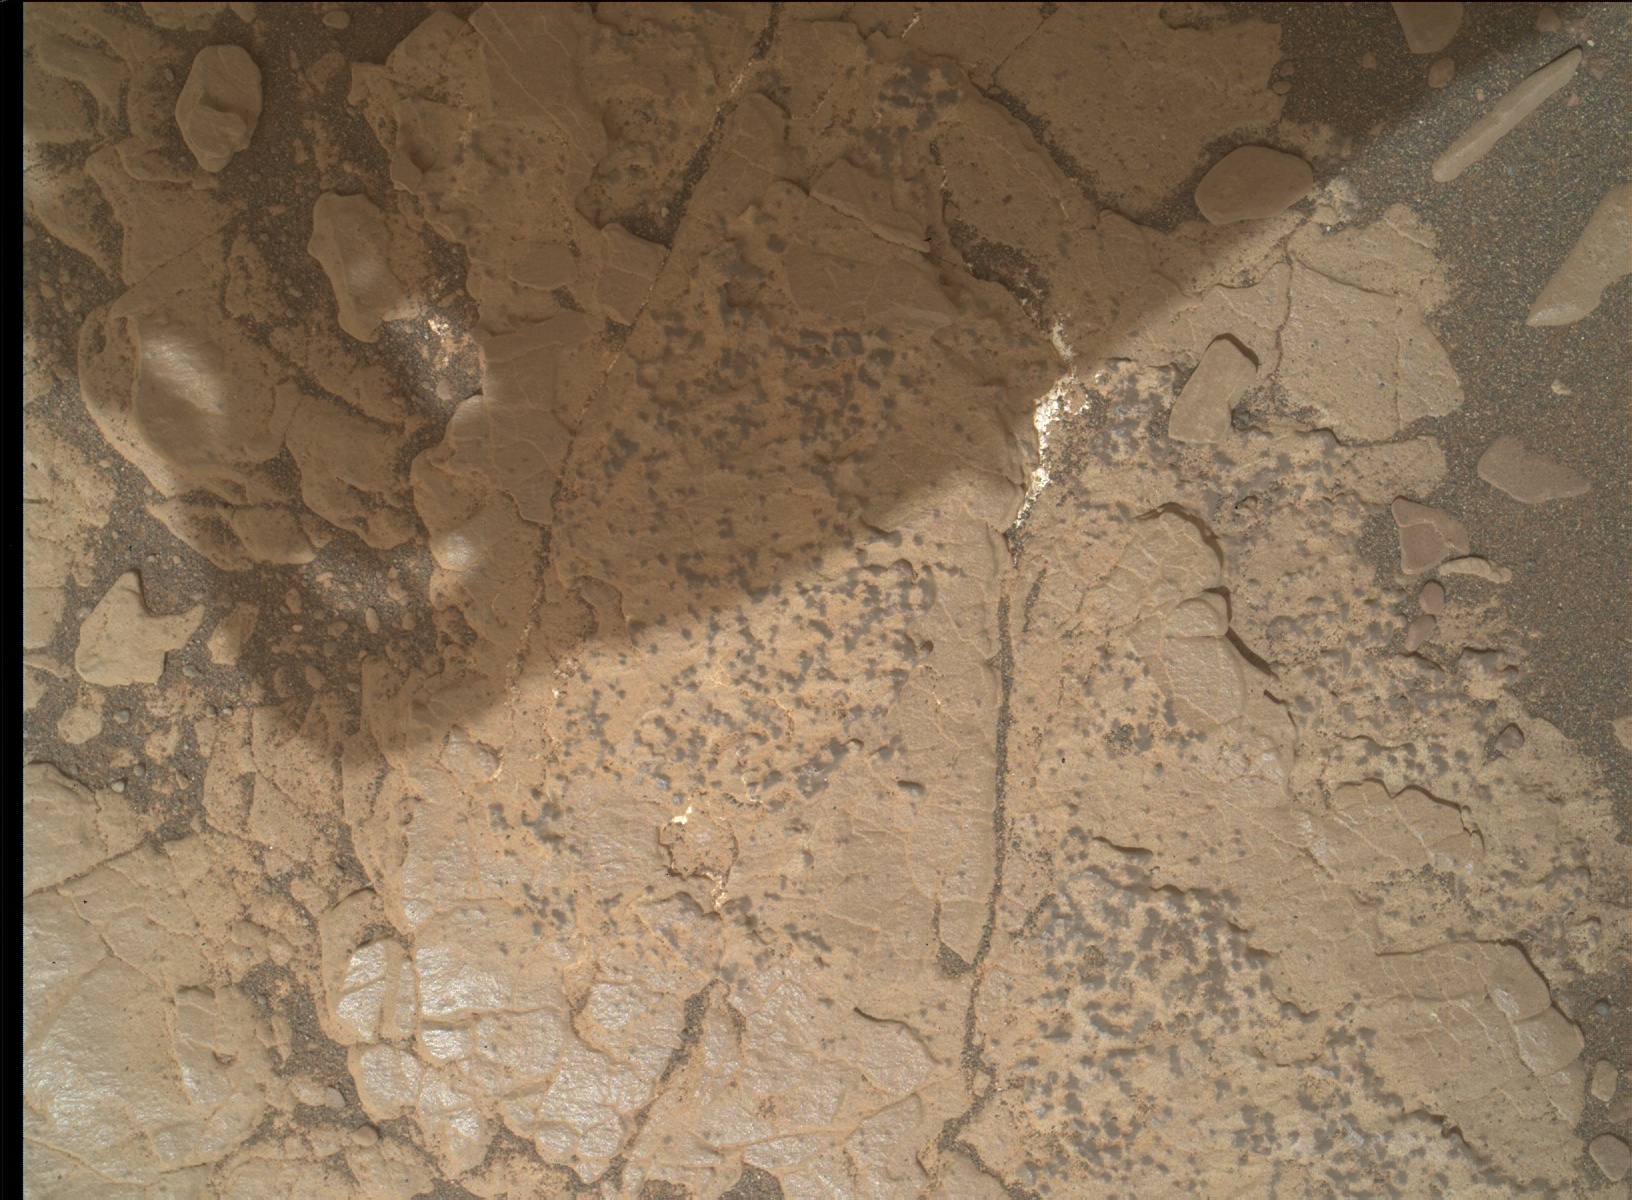 Nasa's Mars rover Curiosity acquired this image using its Mars Hand Lens Imager (MAHLI) on Sol 2870, at drive 2176, site number 82